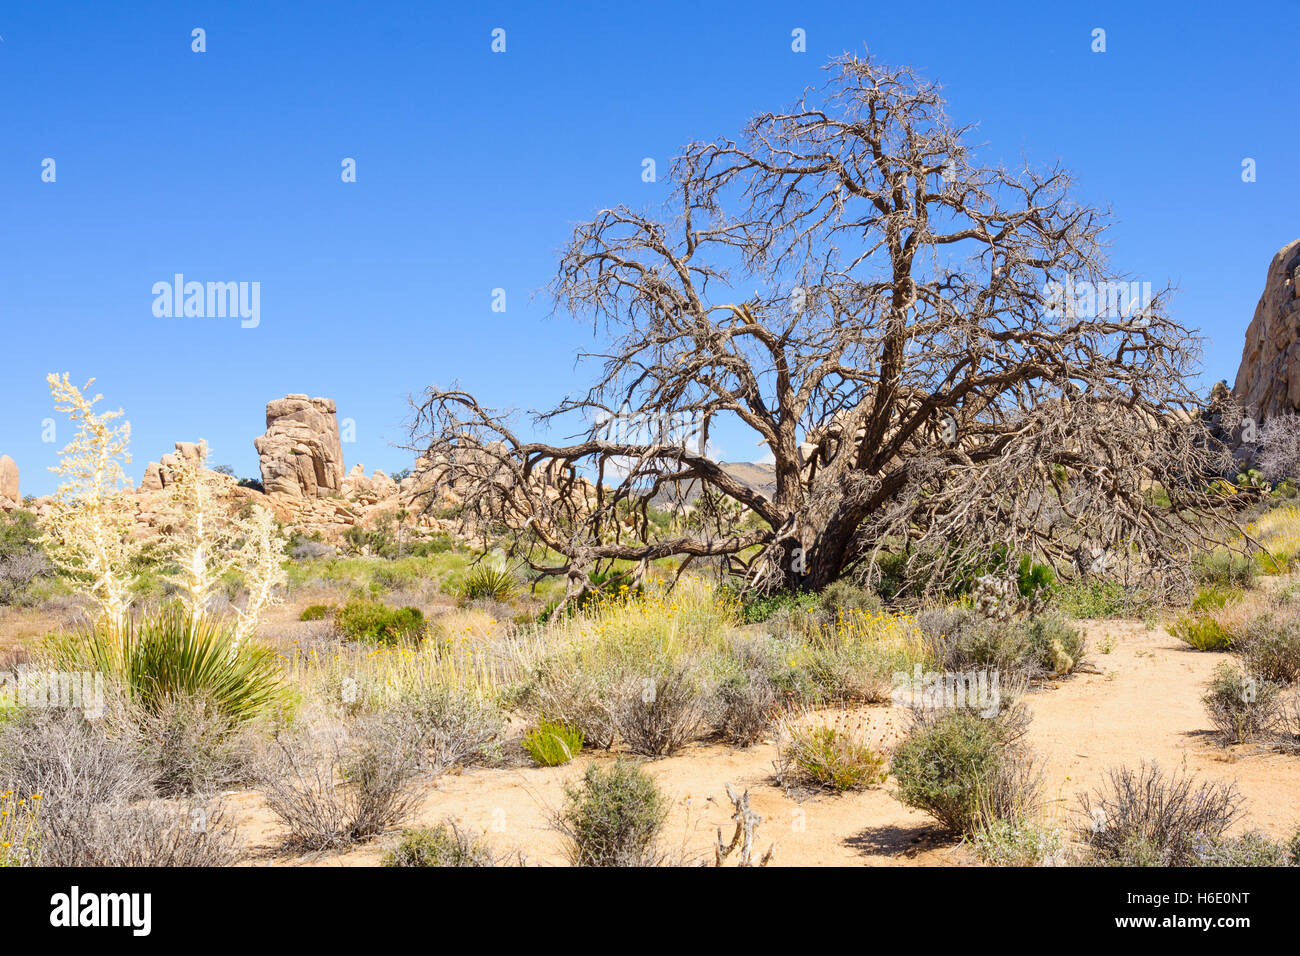 An old tree and landscape in Joshua Tree National Park, California, USA Stock Photo